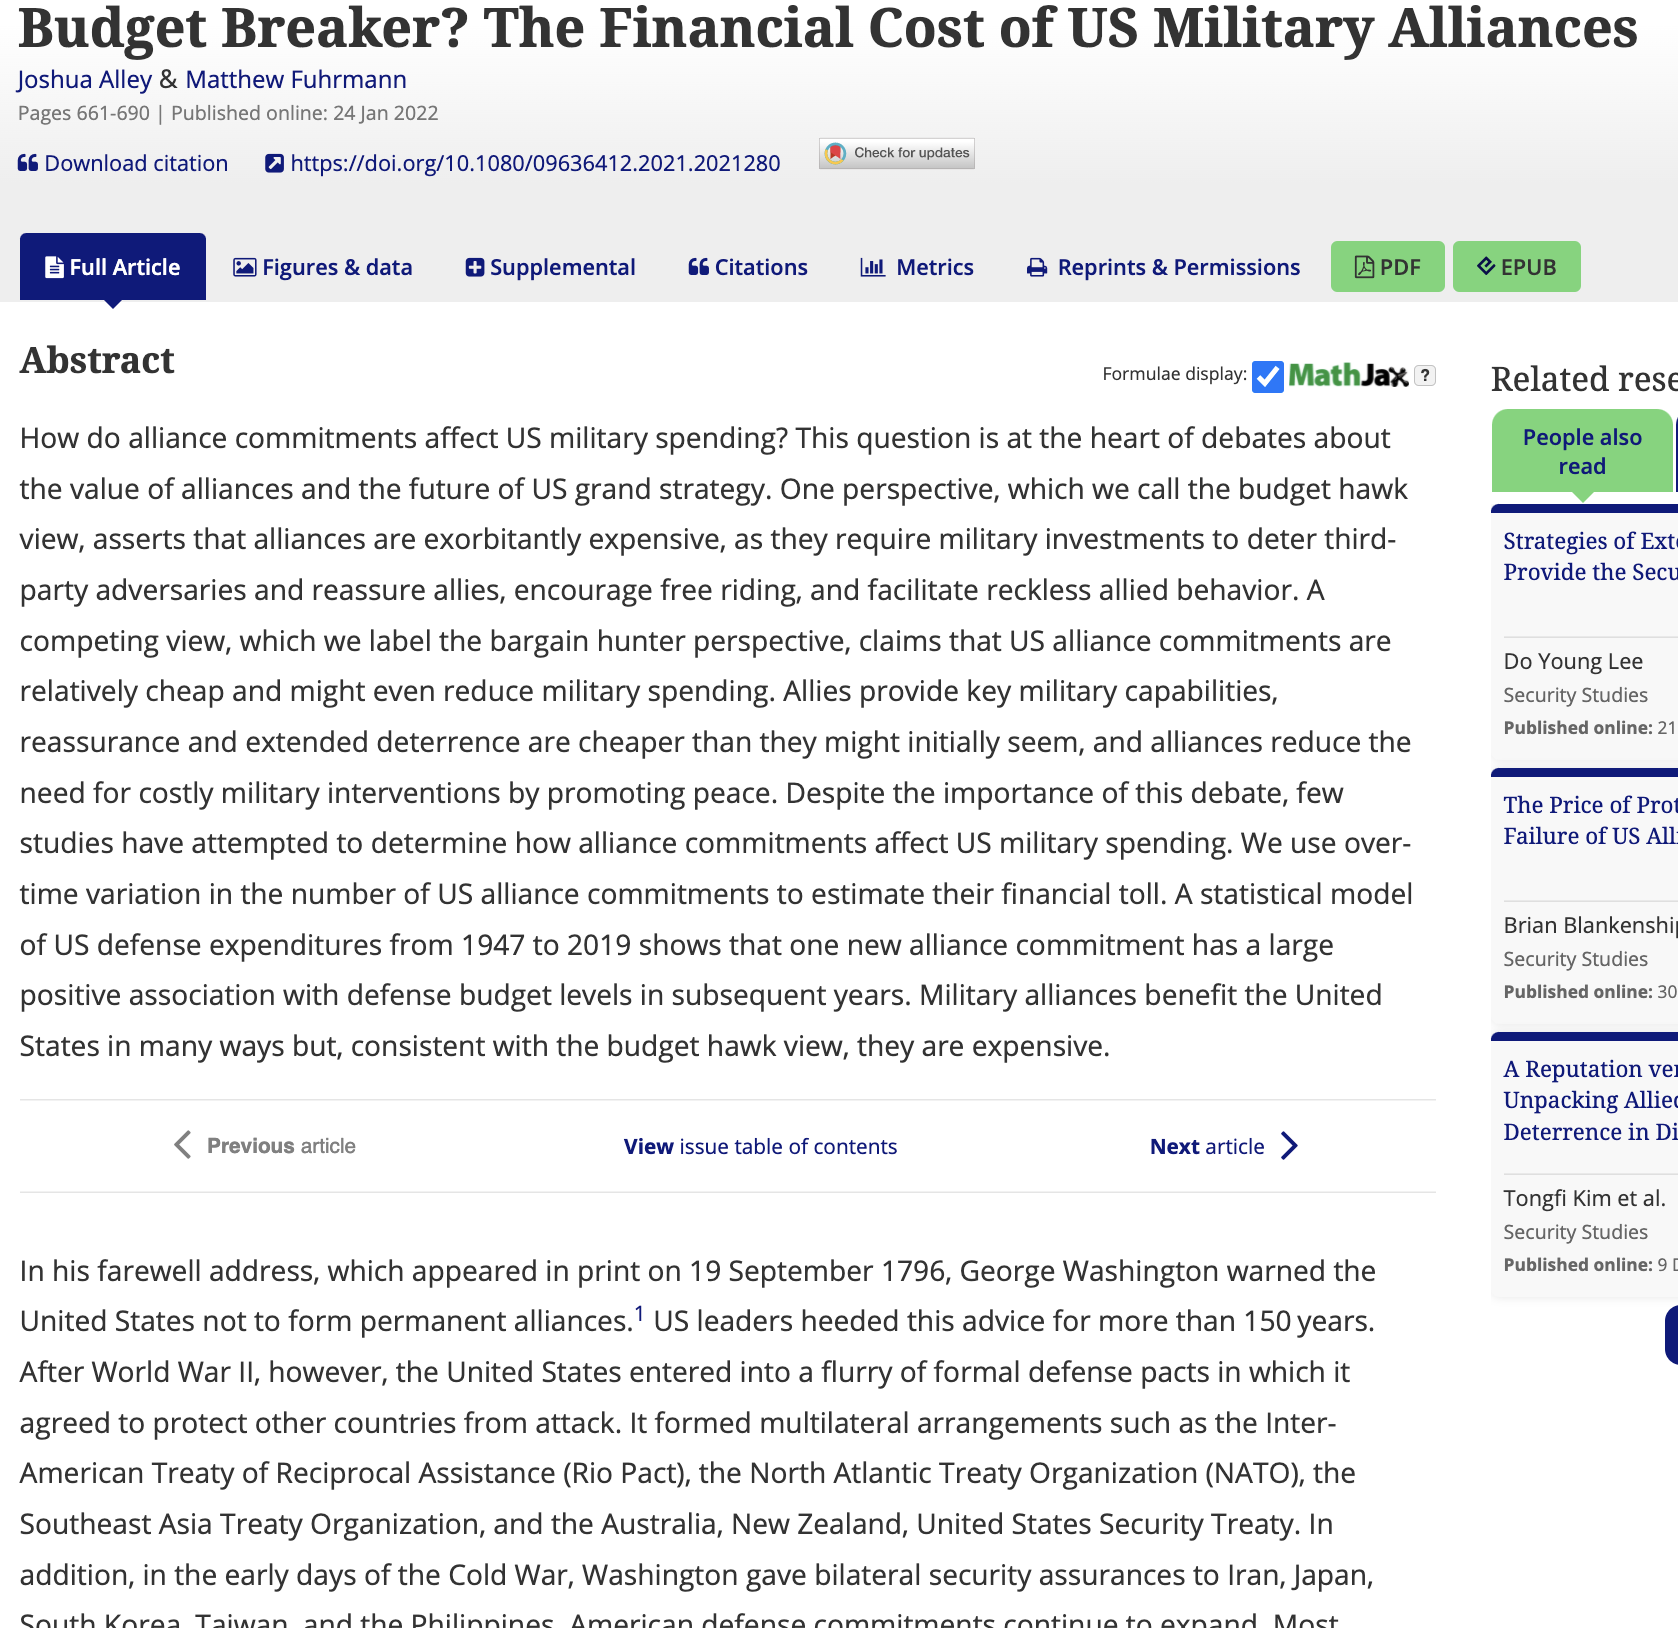 Budget Breaker? The Financial Cost of US Military Alliances